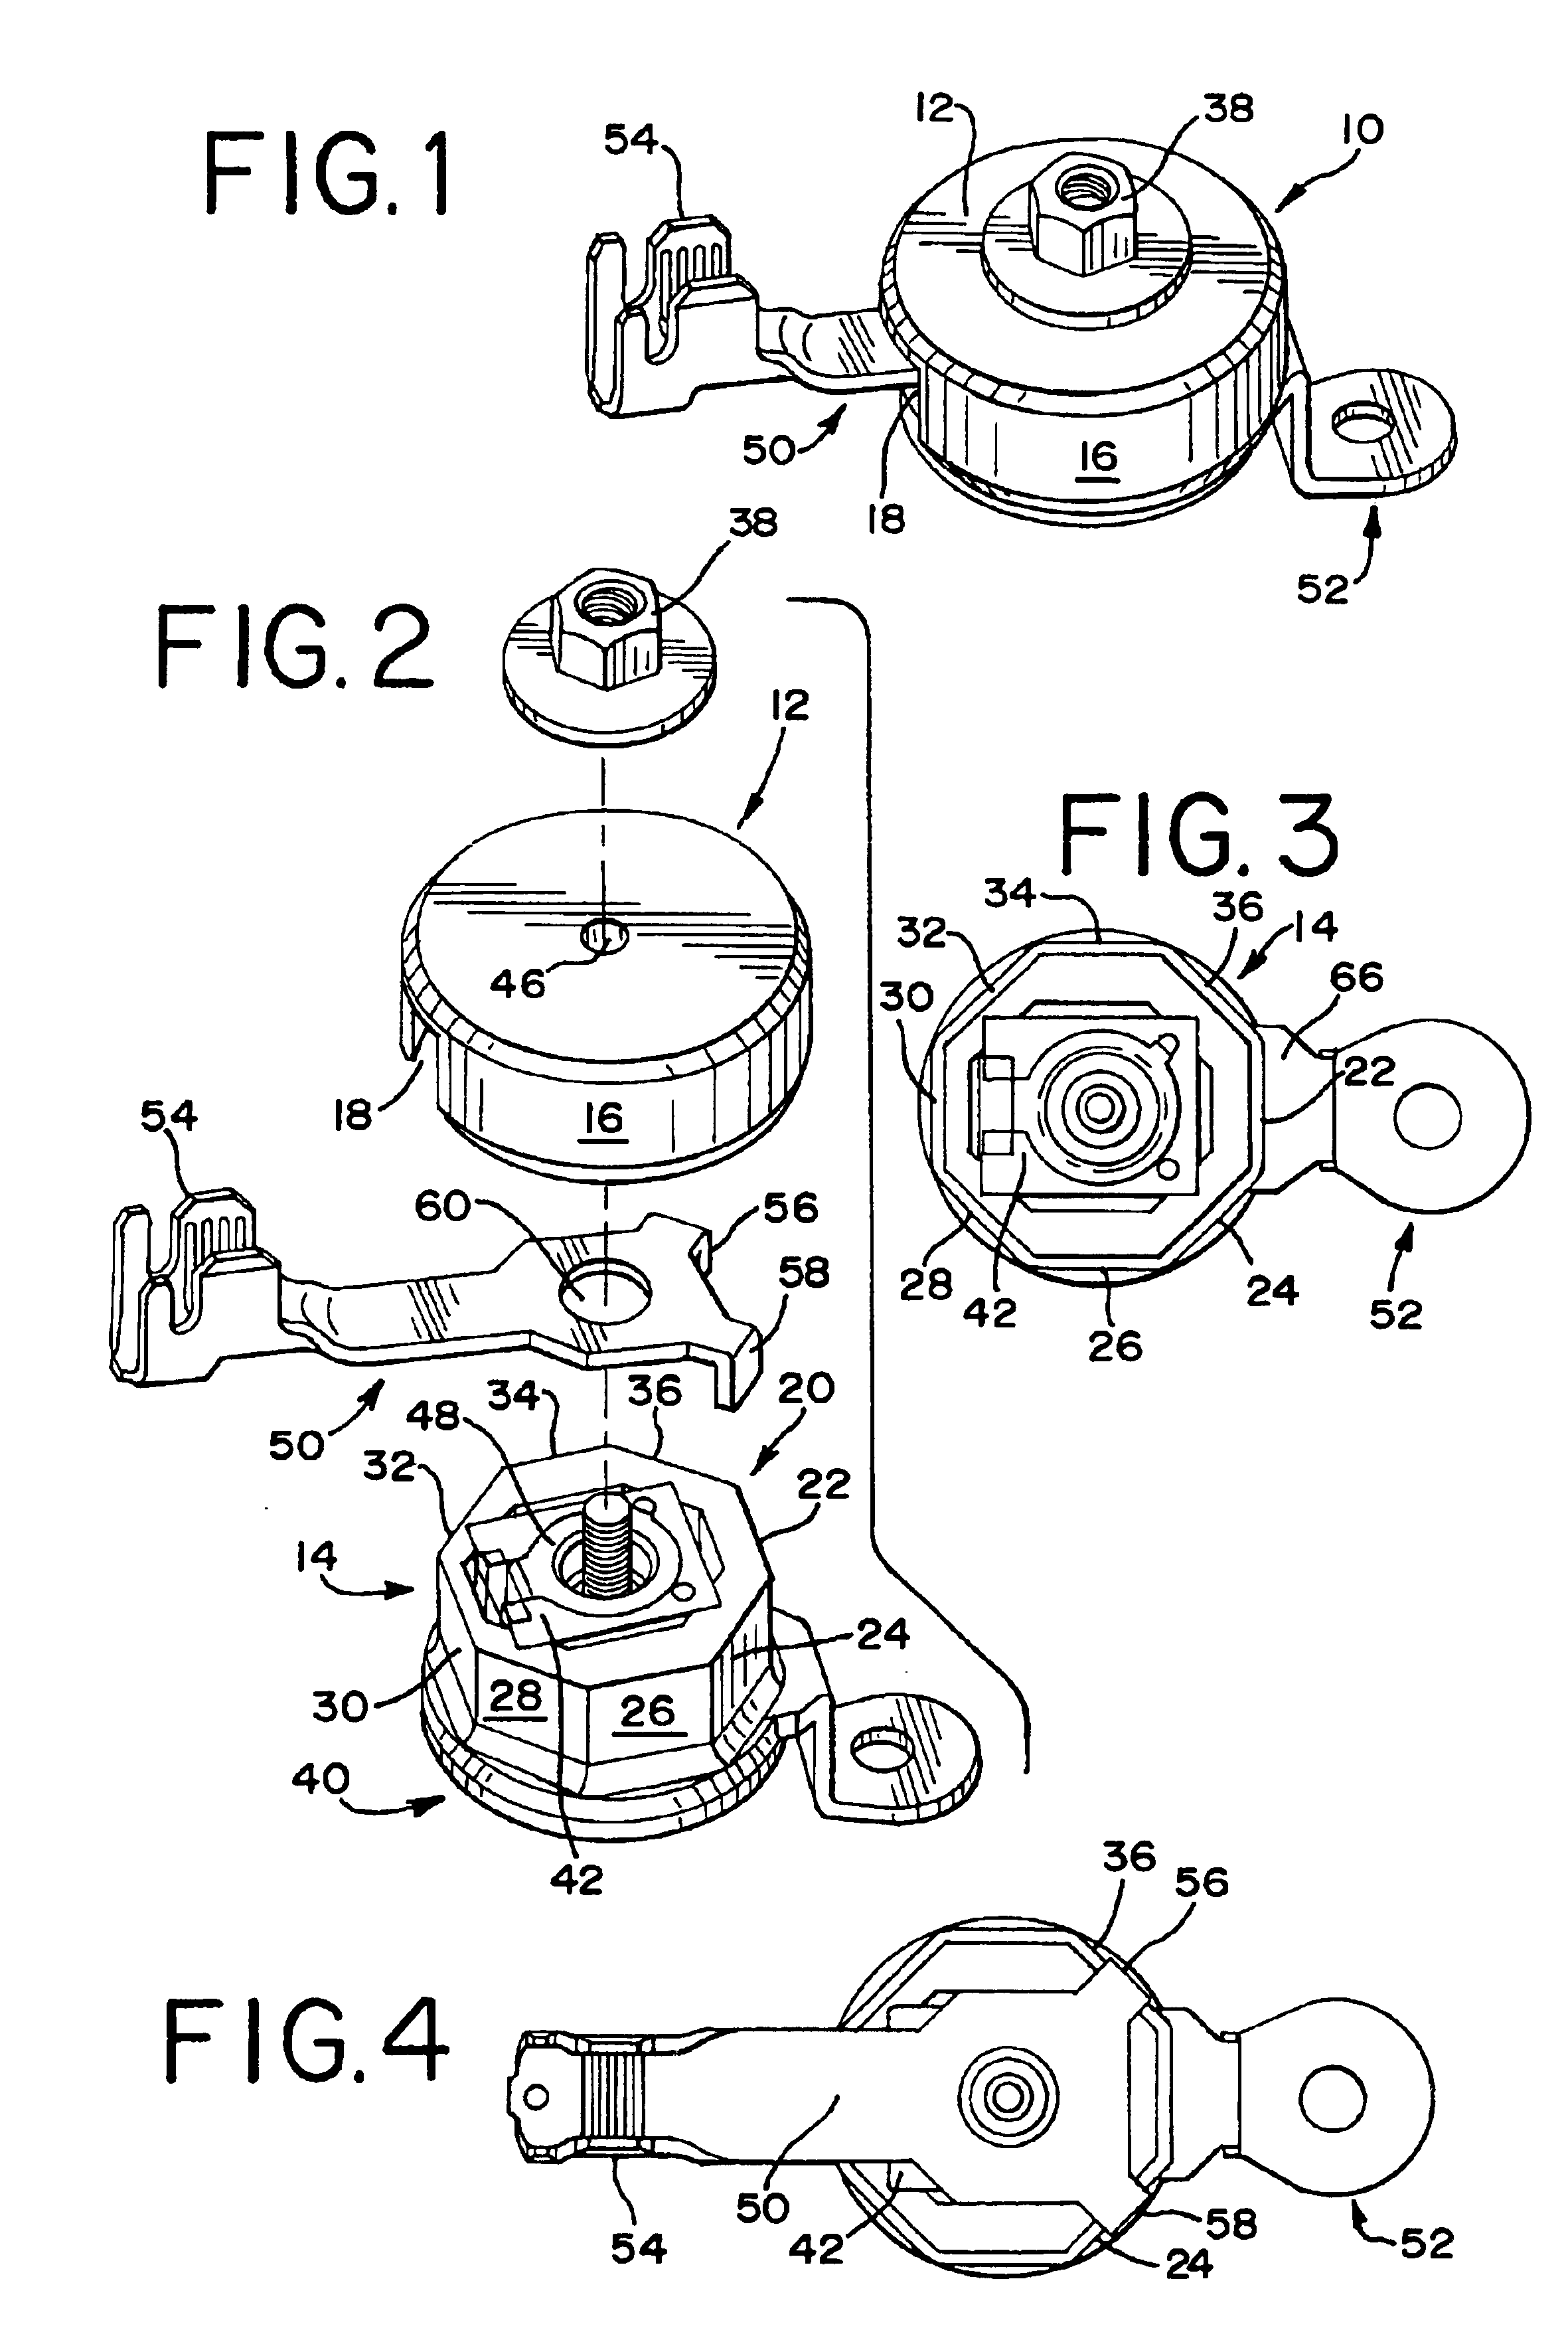 Fuse holder with adjustable terminals